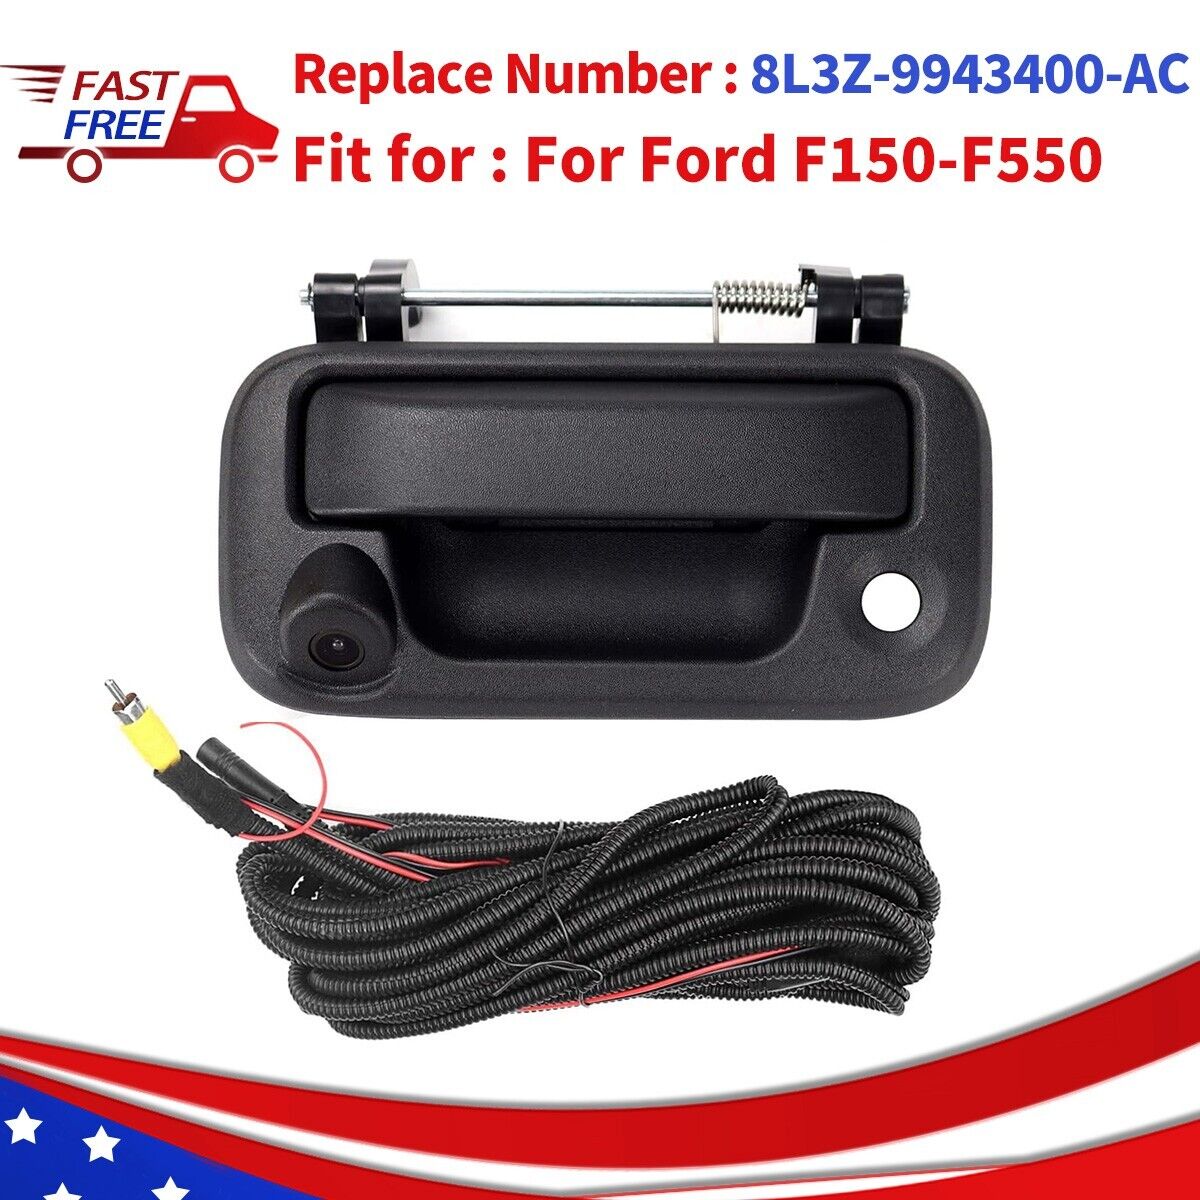 For Ford F150 F250 F350 F450 Trucks Tailgate Handle With Rear View Backup Camera